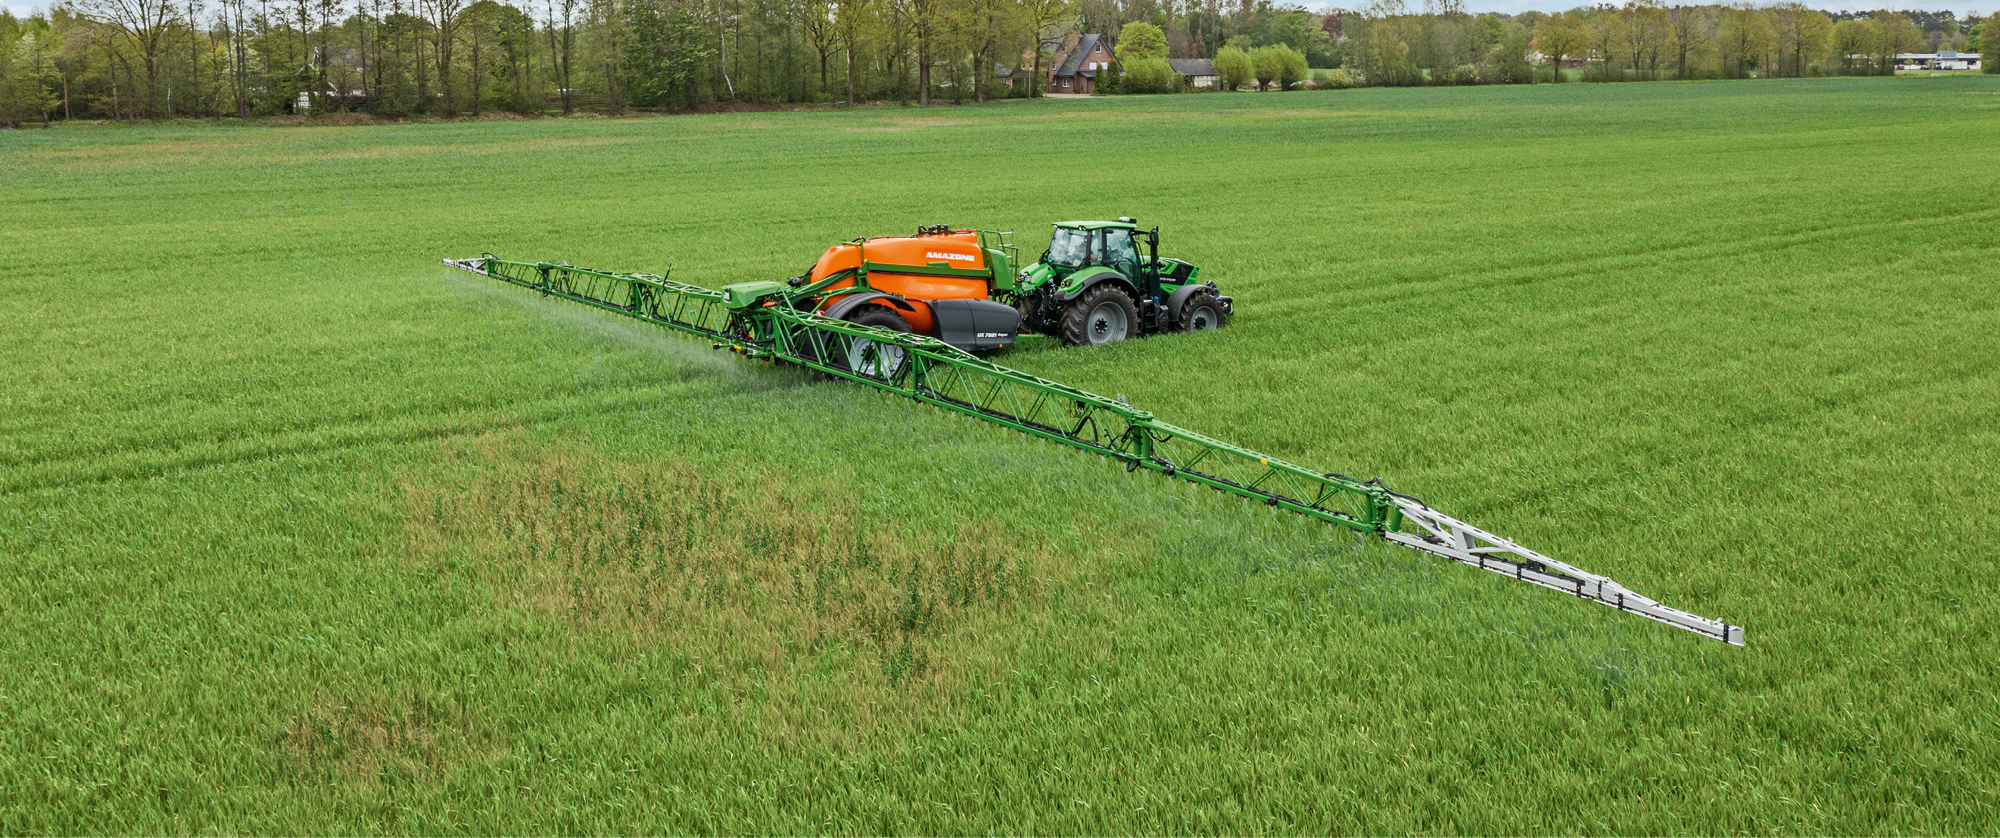 Weed patches can be treated in the field by means of DirectInject and the use of application maps.